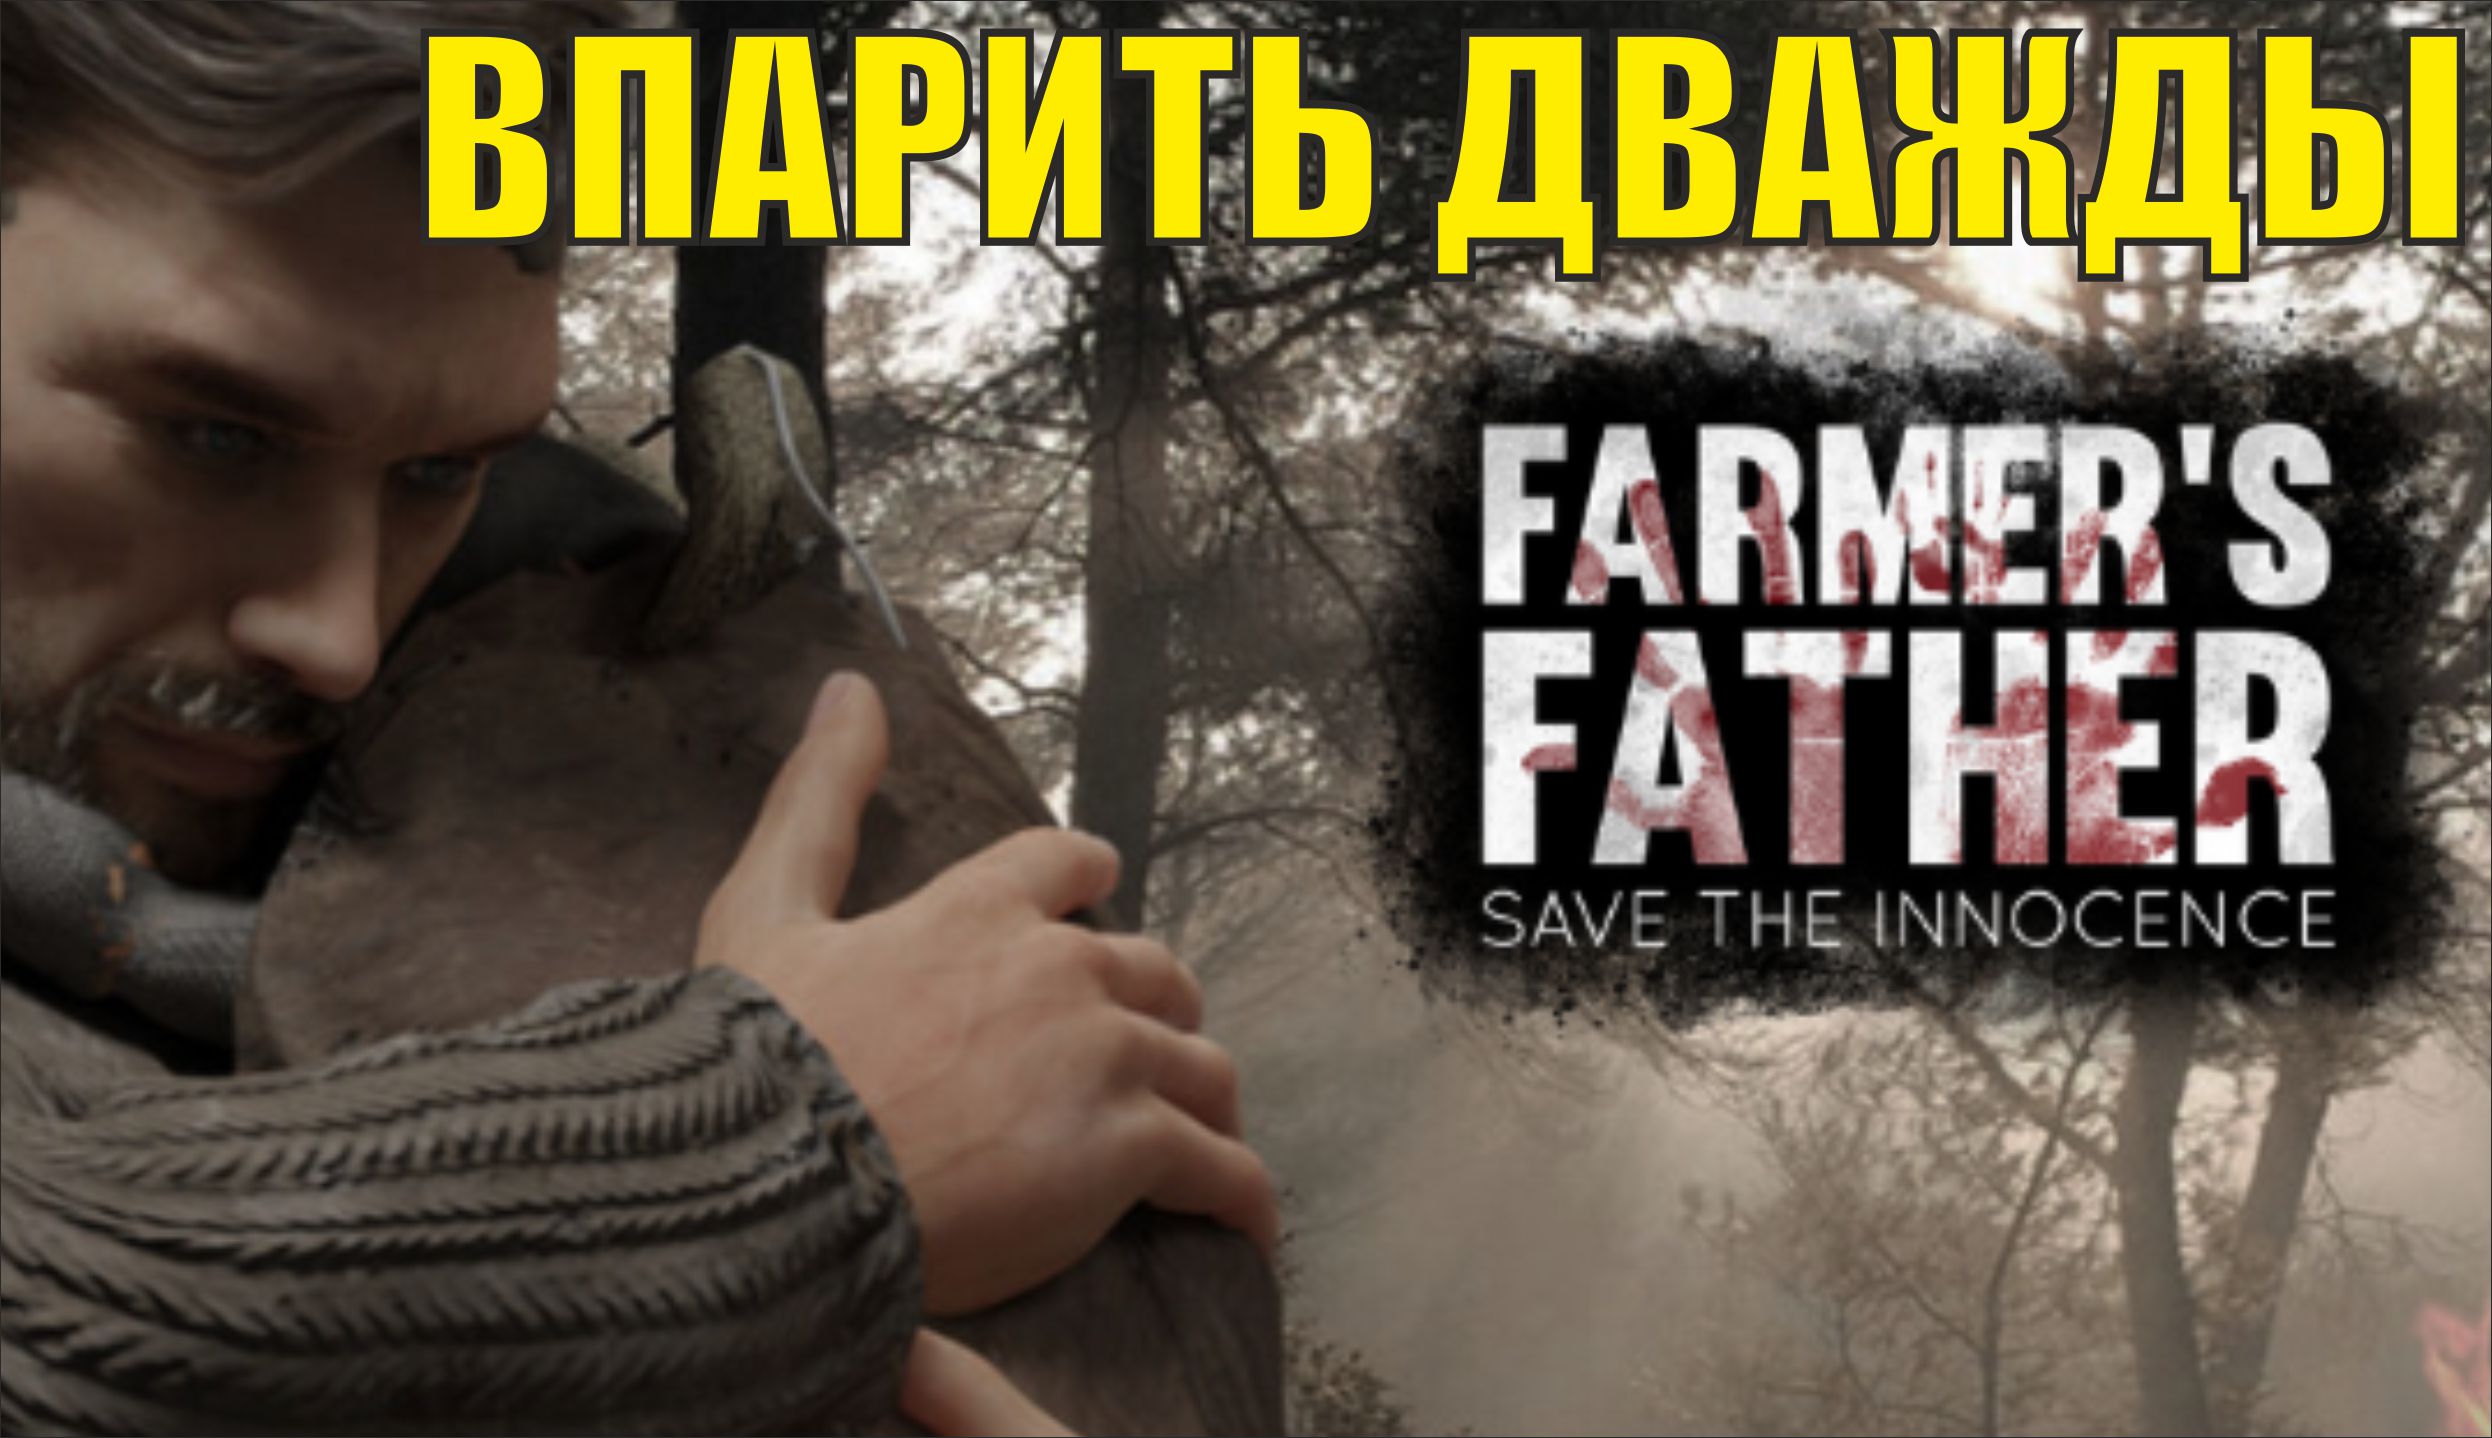 Farmers father save the innocence